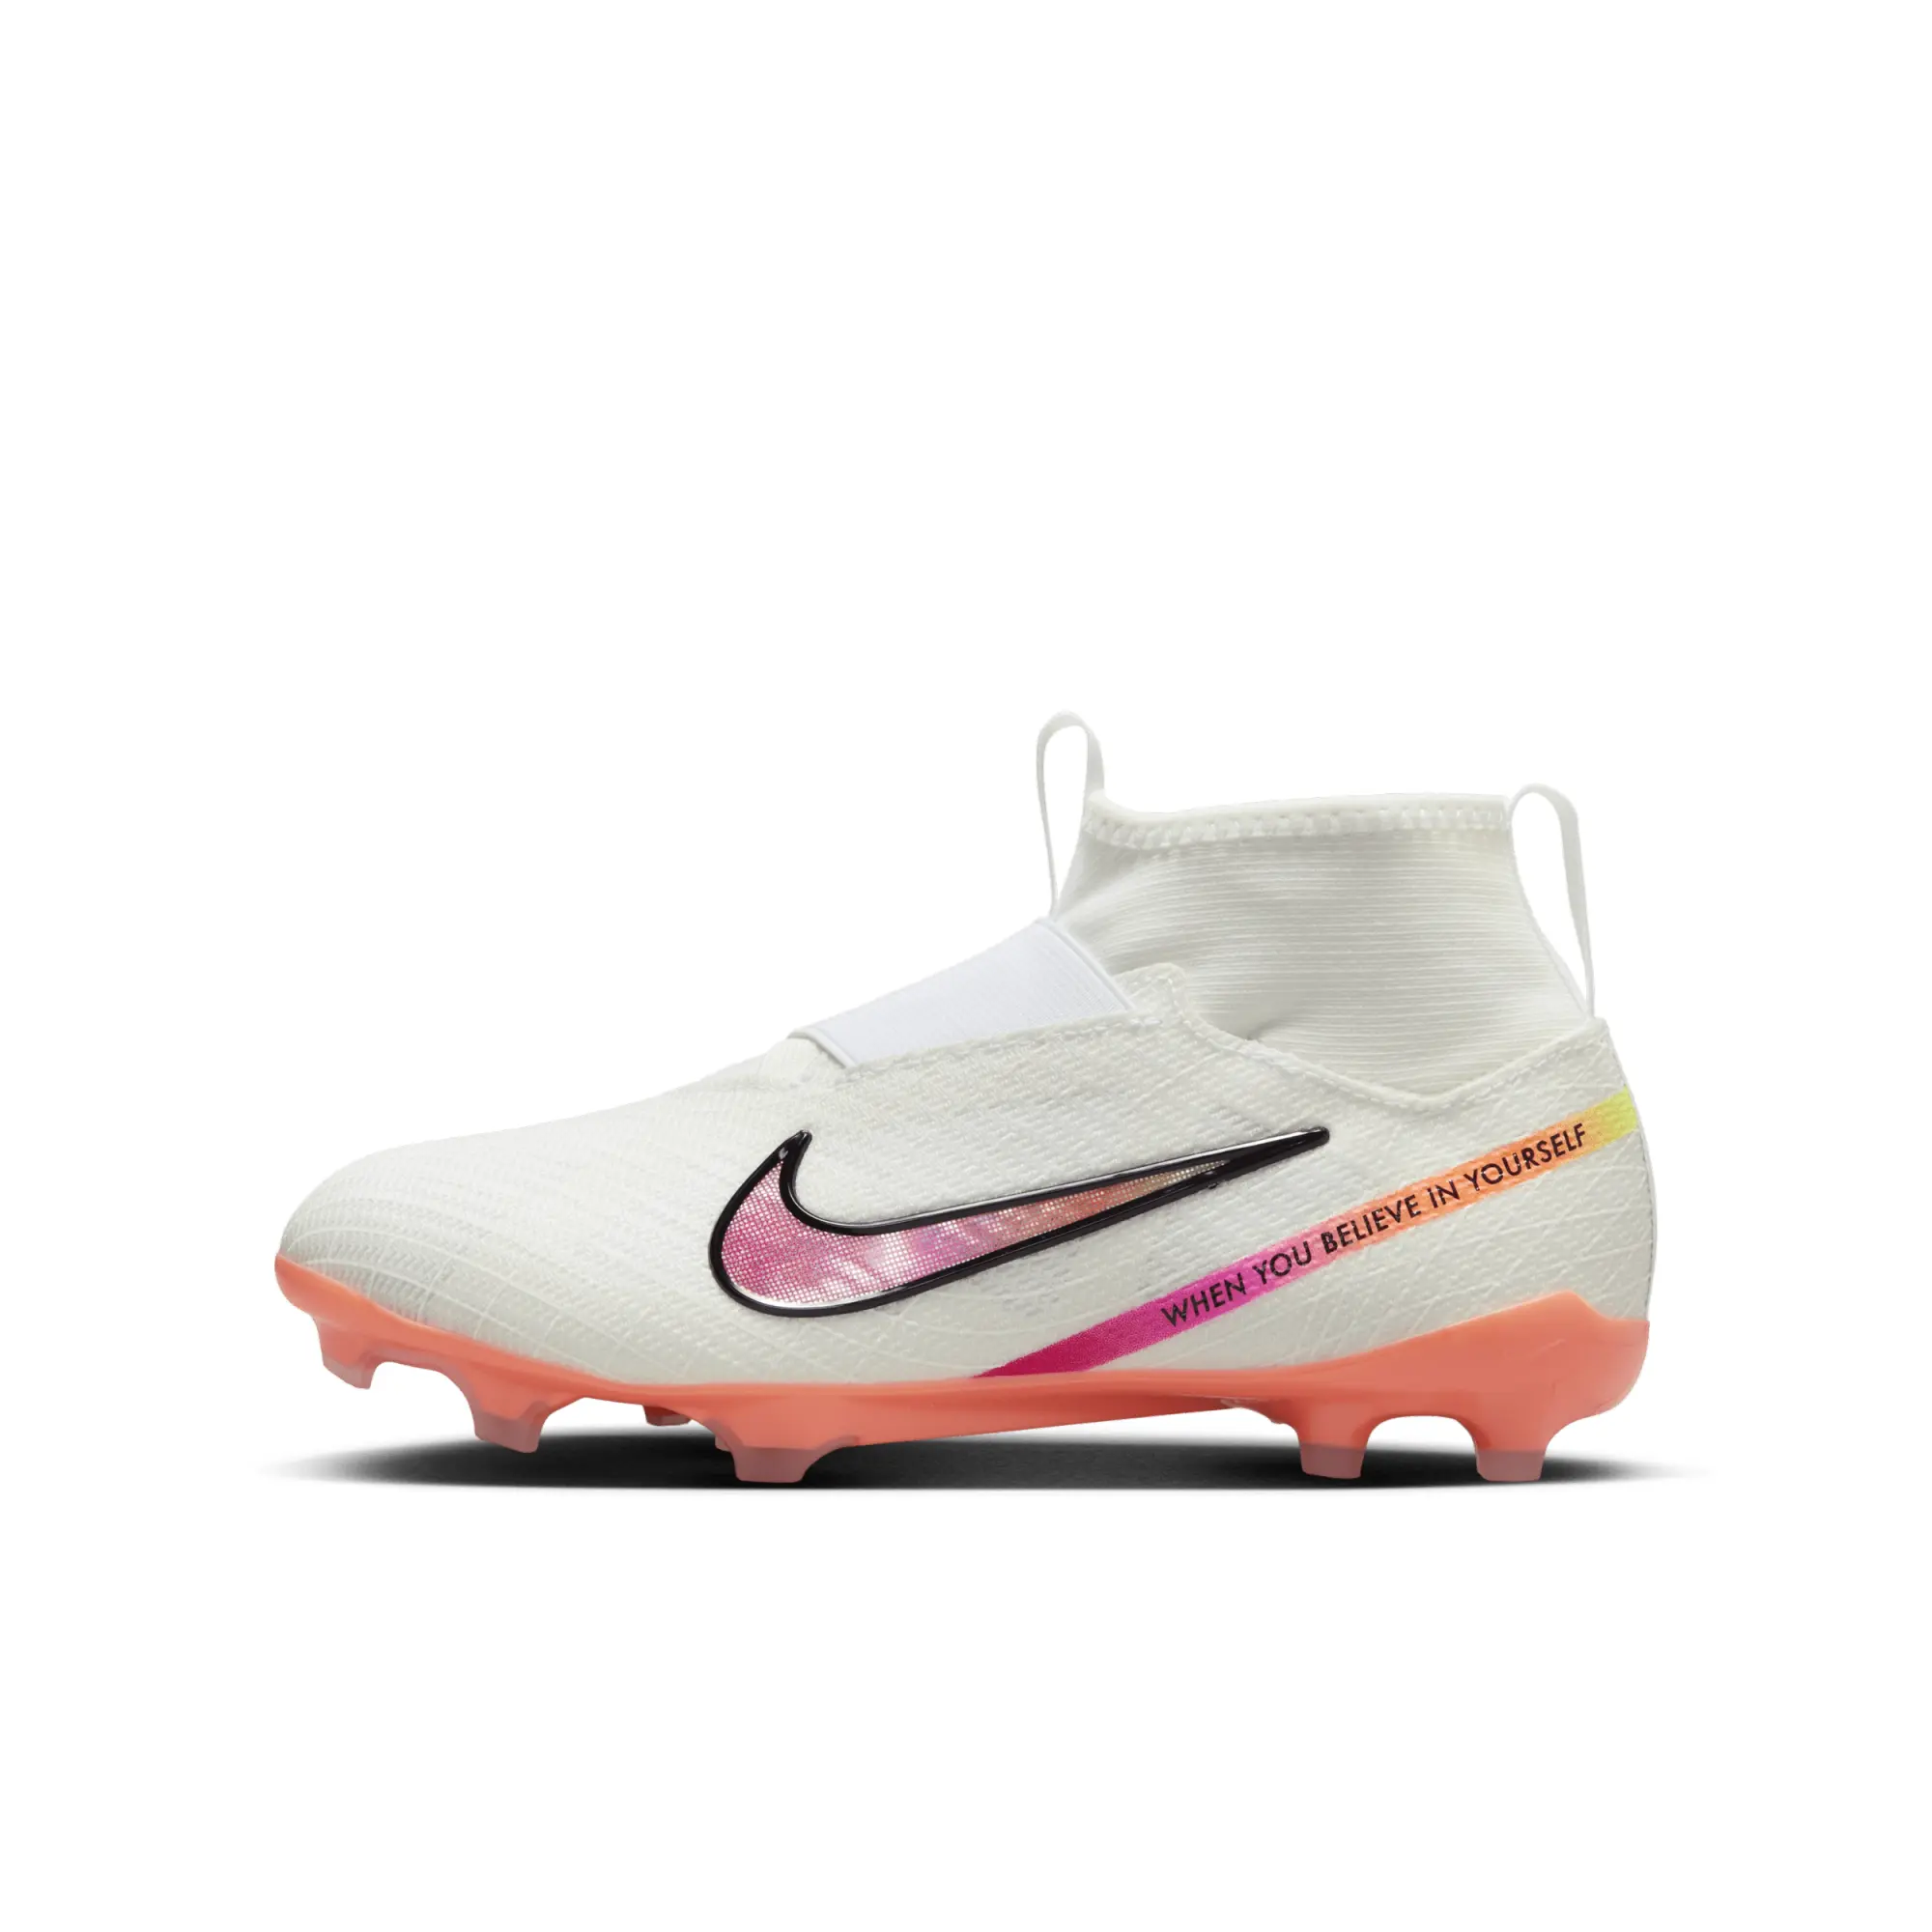 Nike Jr. Mercurial Superfly 9 Pro 'Marcus Rashford' Younger/Older Kids' Firm-Ground Football Boot - White